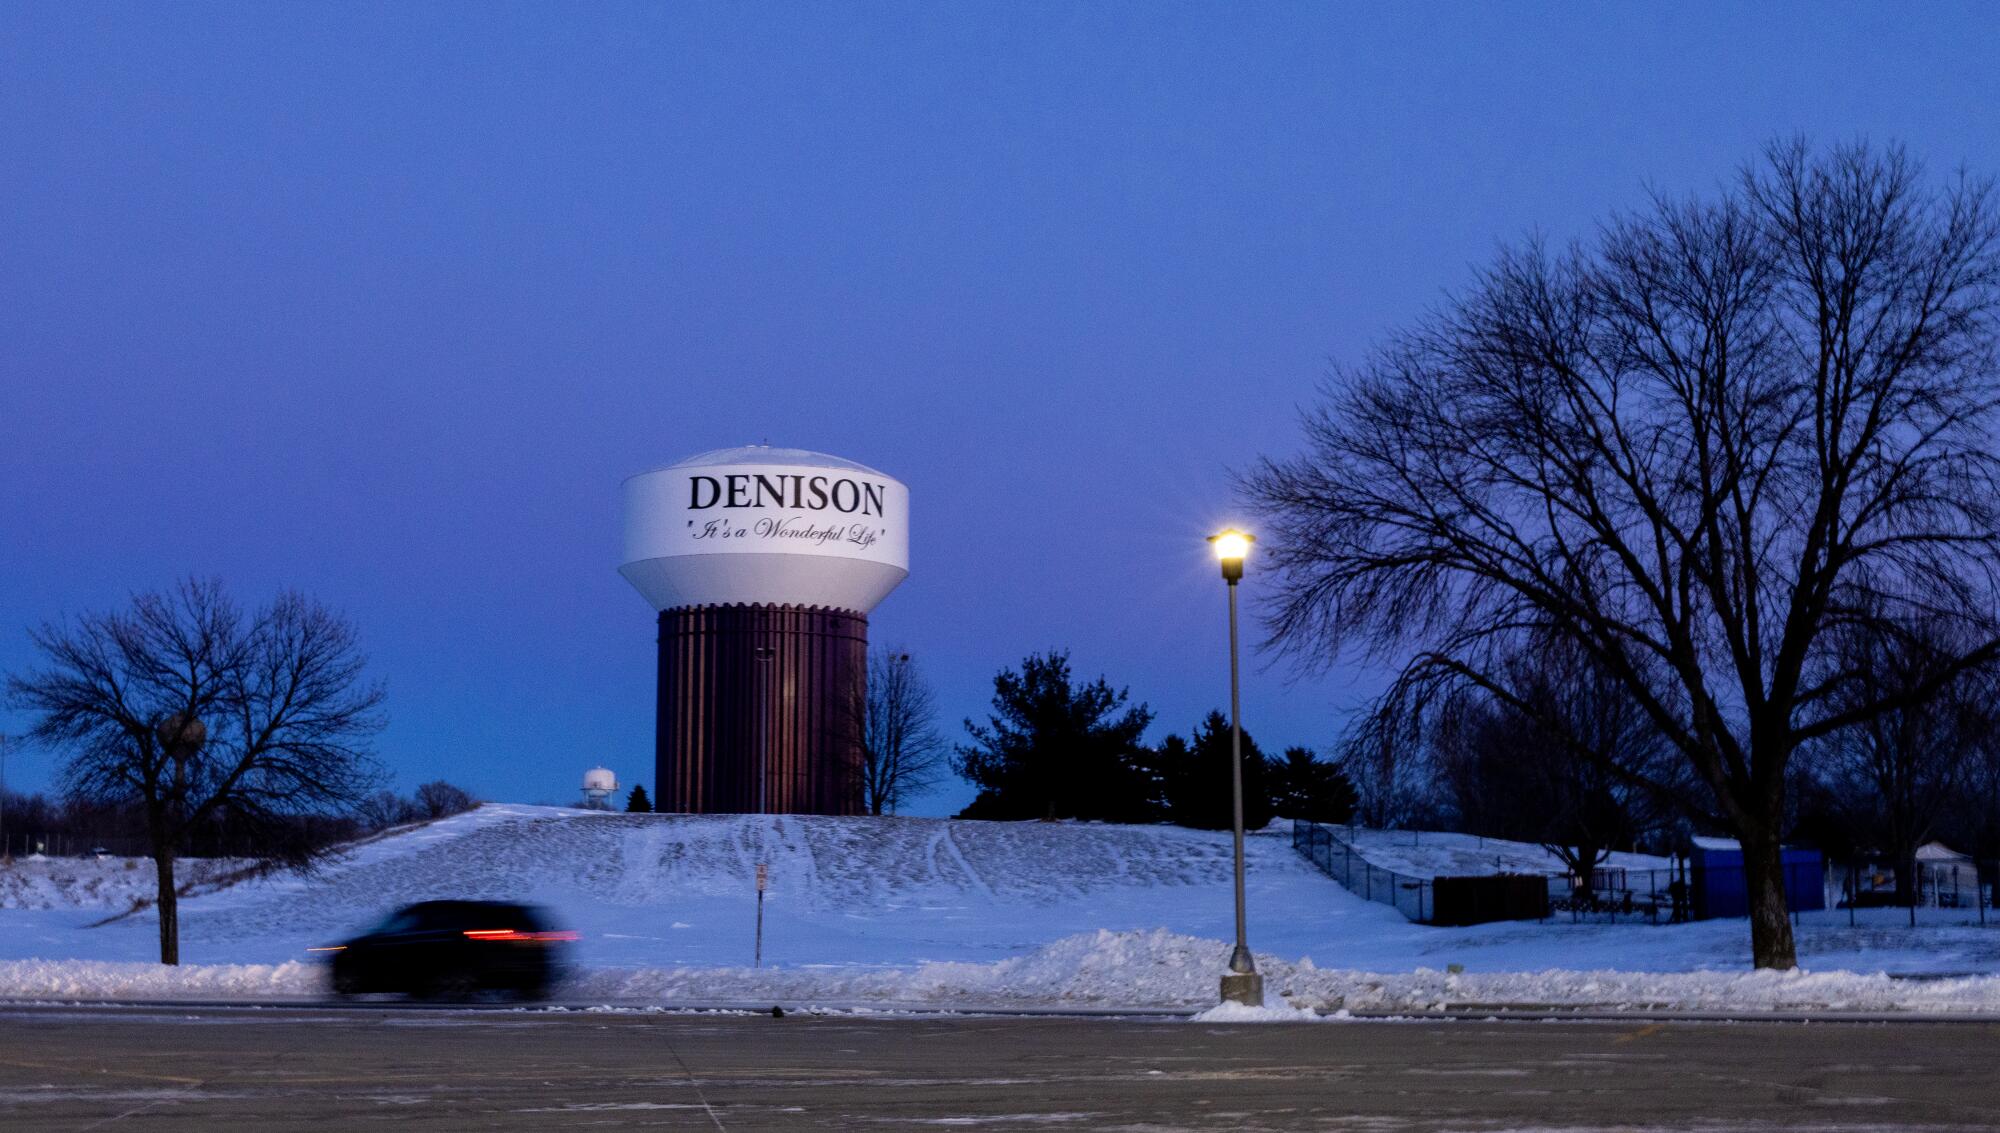 A water tower marks the town of Denison, population about 8,000, in western Iowa.